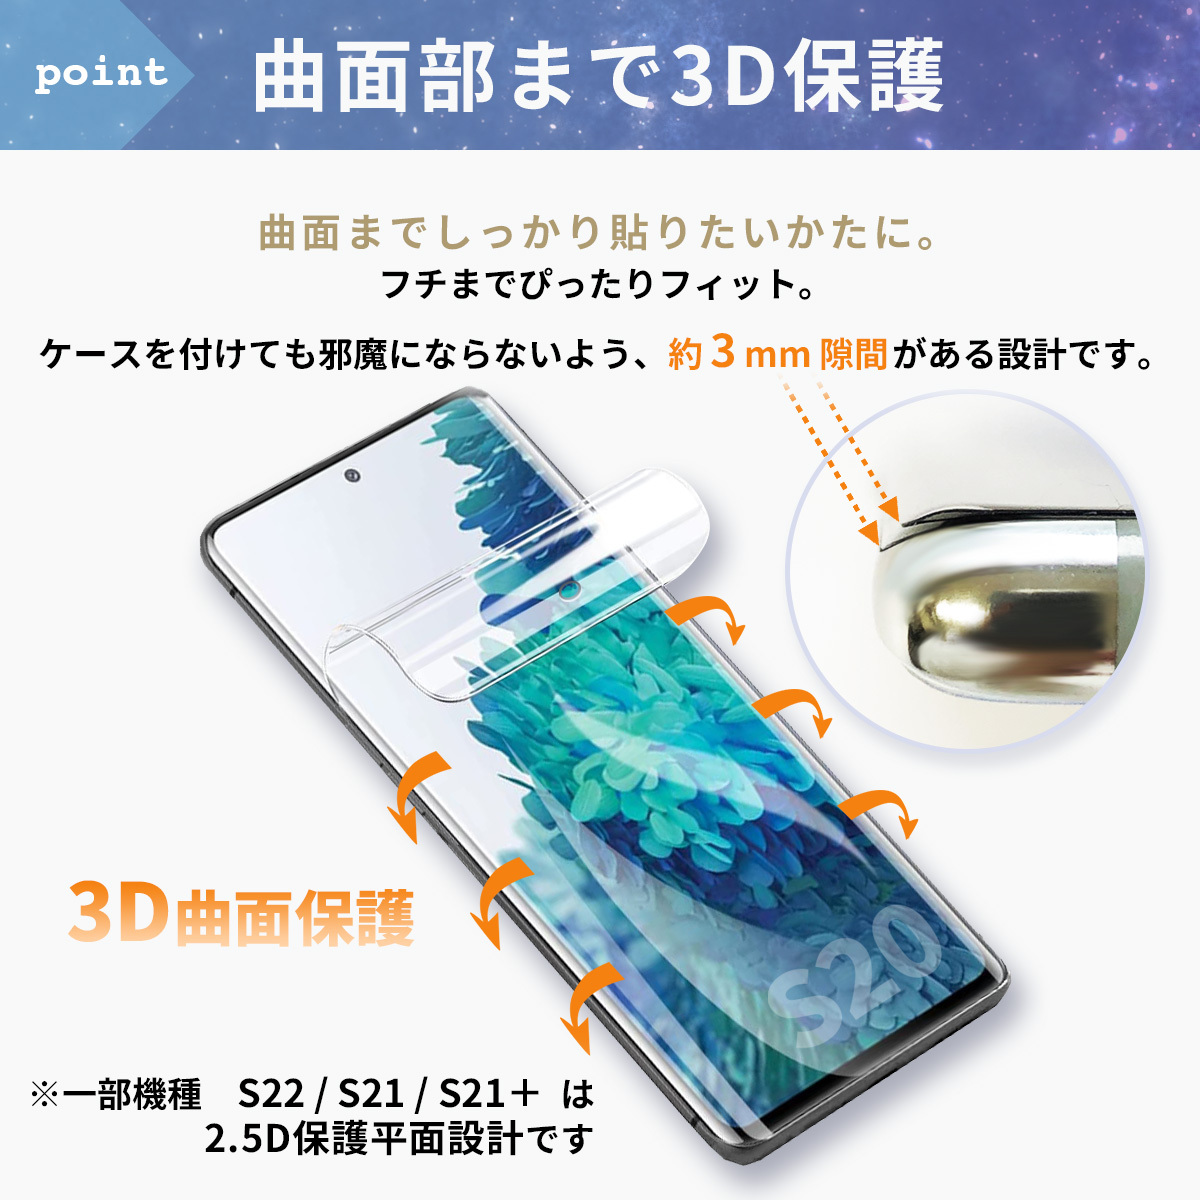 galaxy S24 Ultra フィルム s23 ultra s22 ultra s20 s10 s22 s21 s9 s10 s8 指紋認証 保護 note10 + sc03l 5g 衝撃吸収 透明 クリア ウレタン｜mywaysmart｜08